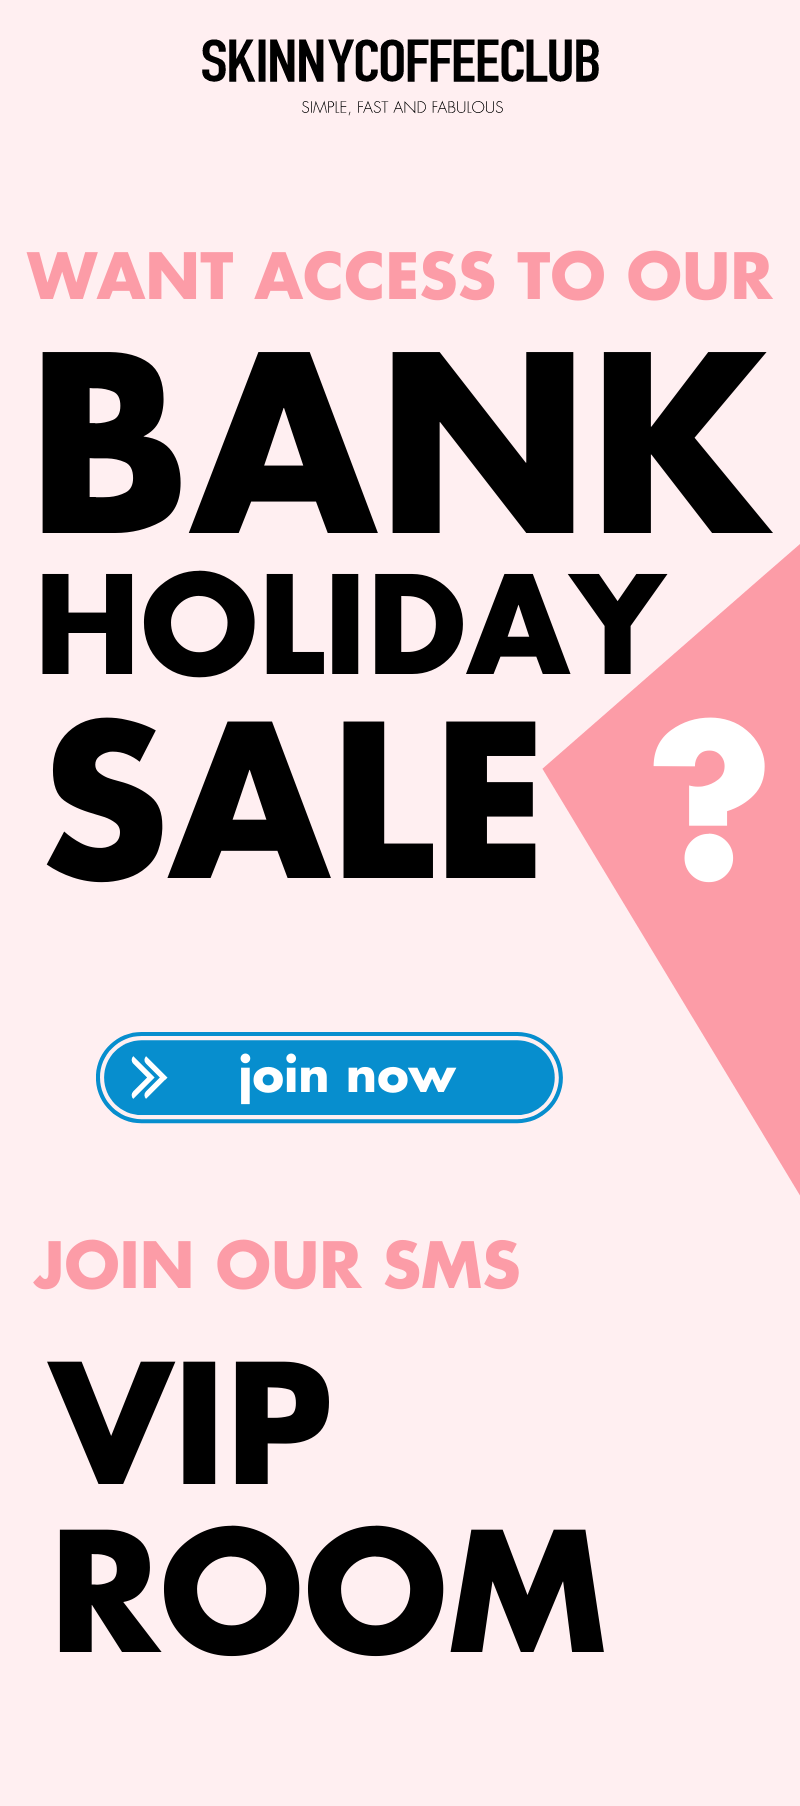 Join our SMS VIP Room to access our Huge Bank Holiday Sale!